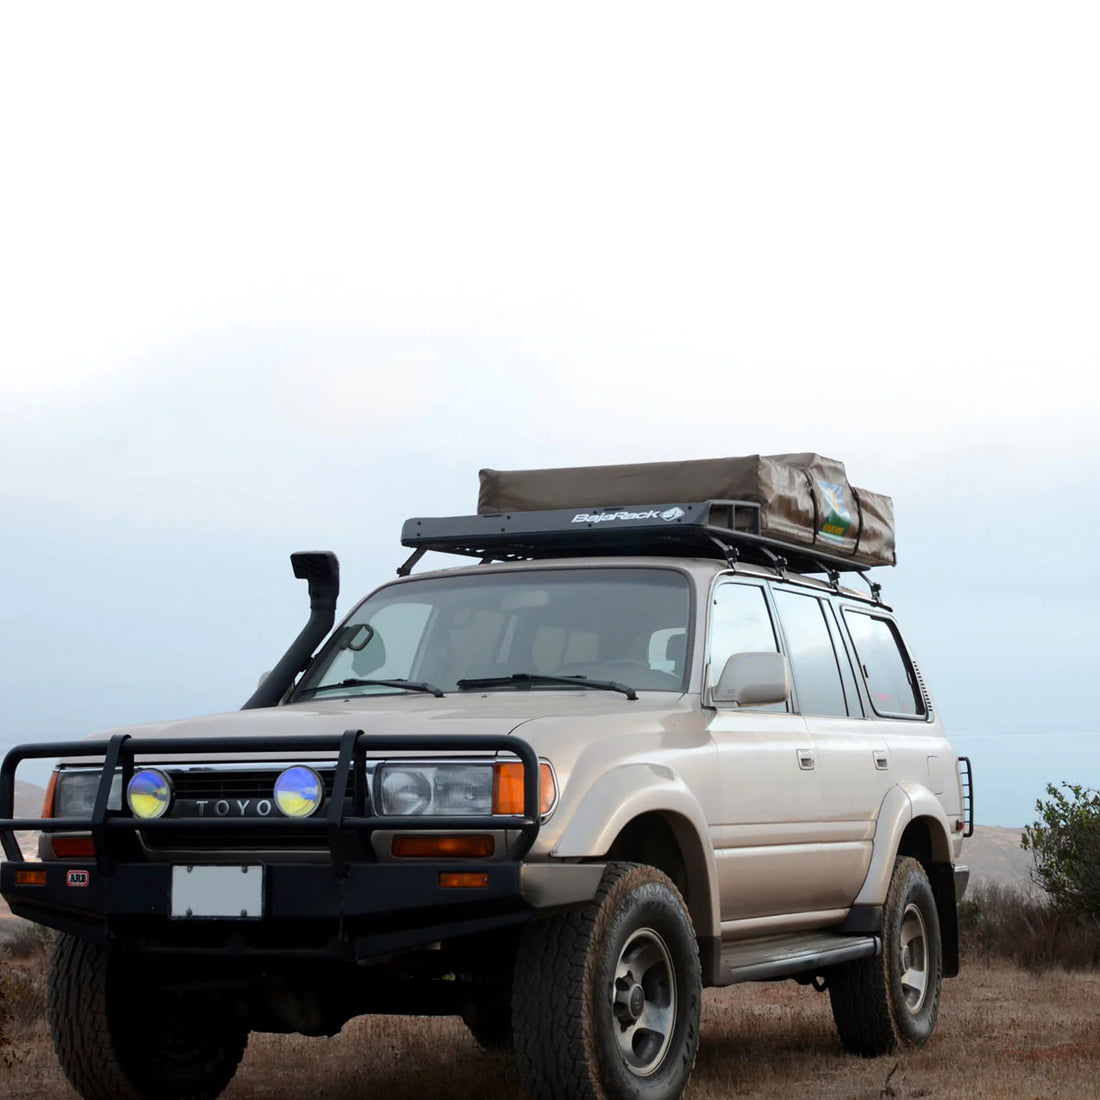 Land Cruiser 80 Series Expedition Roof Rack